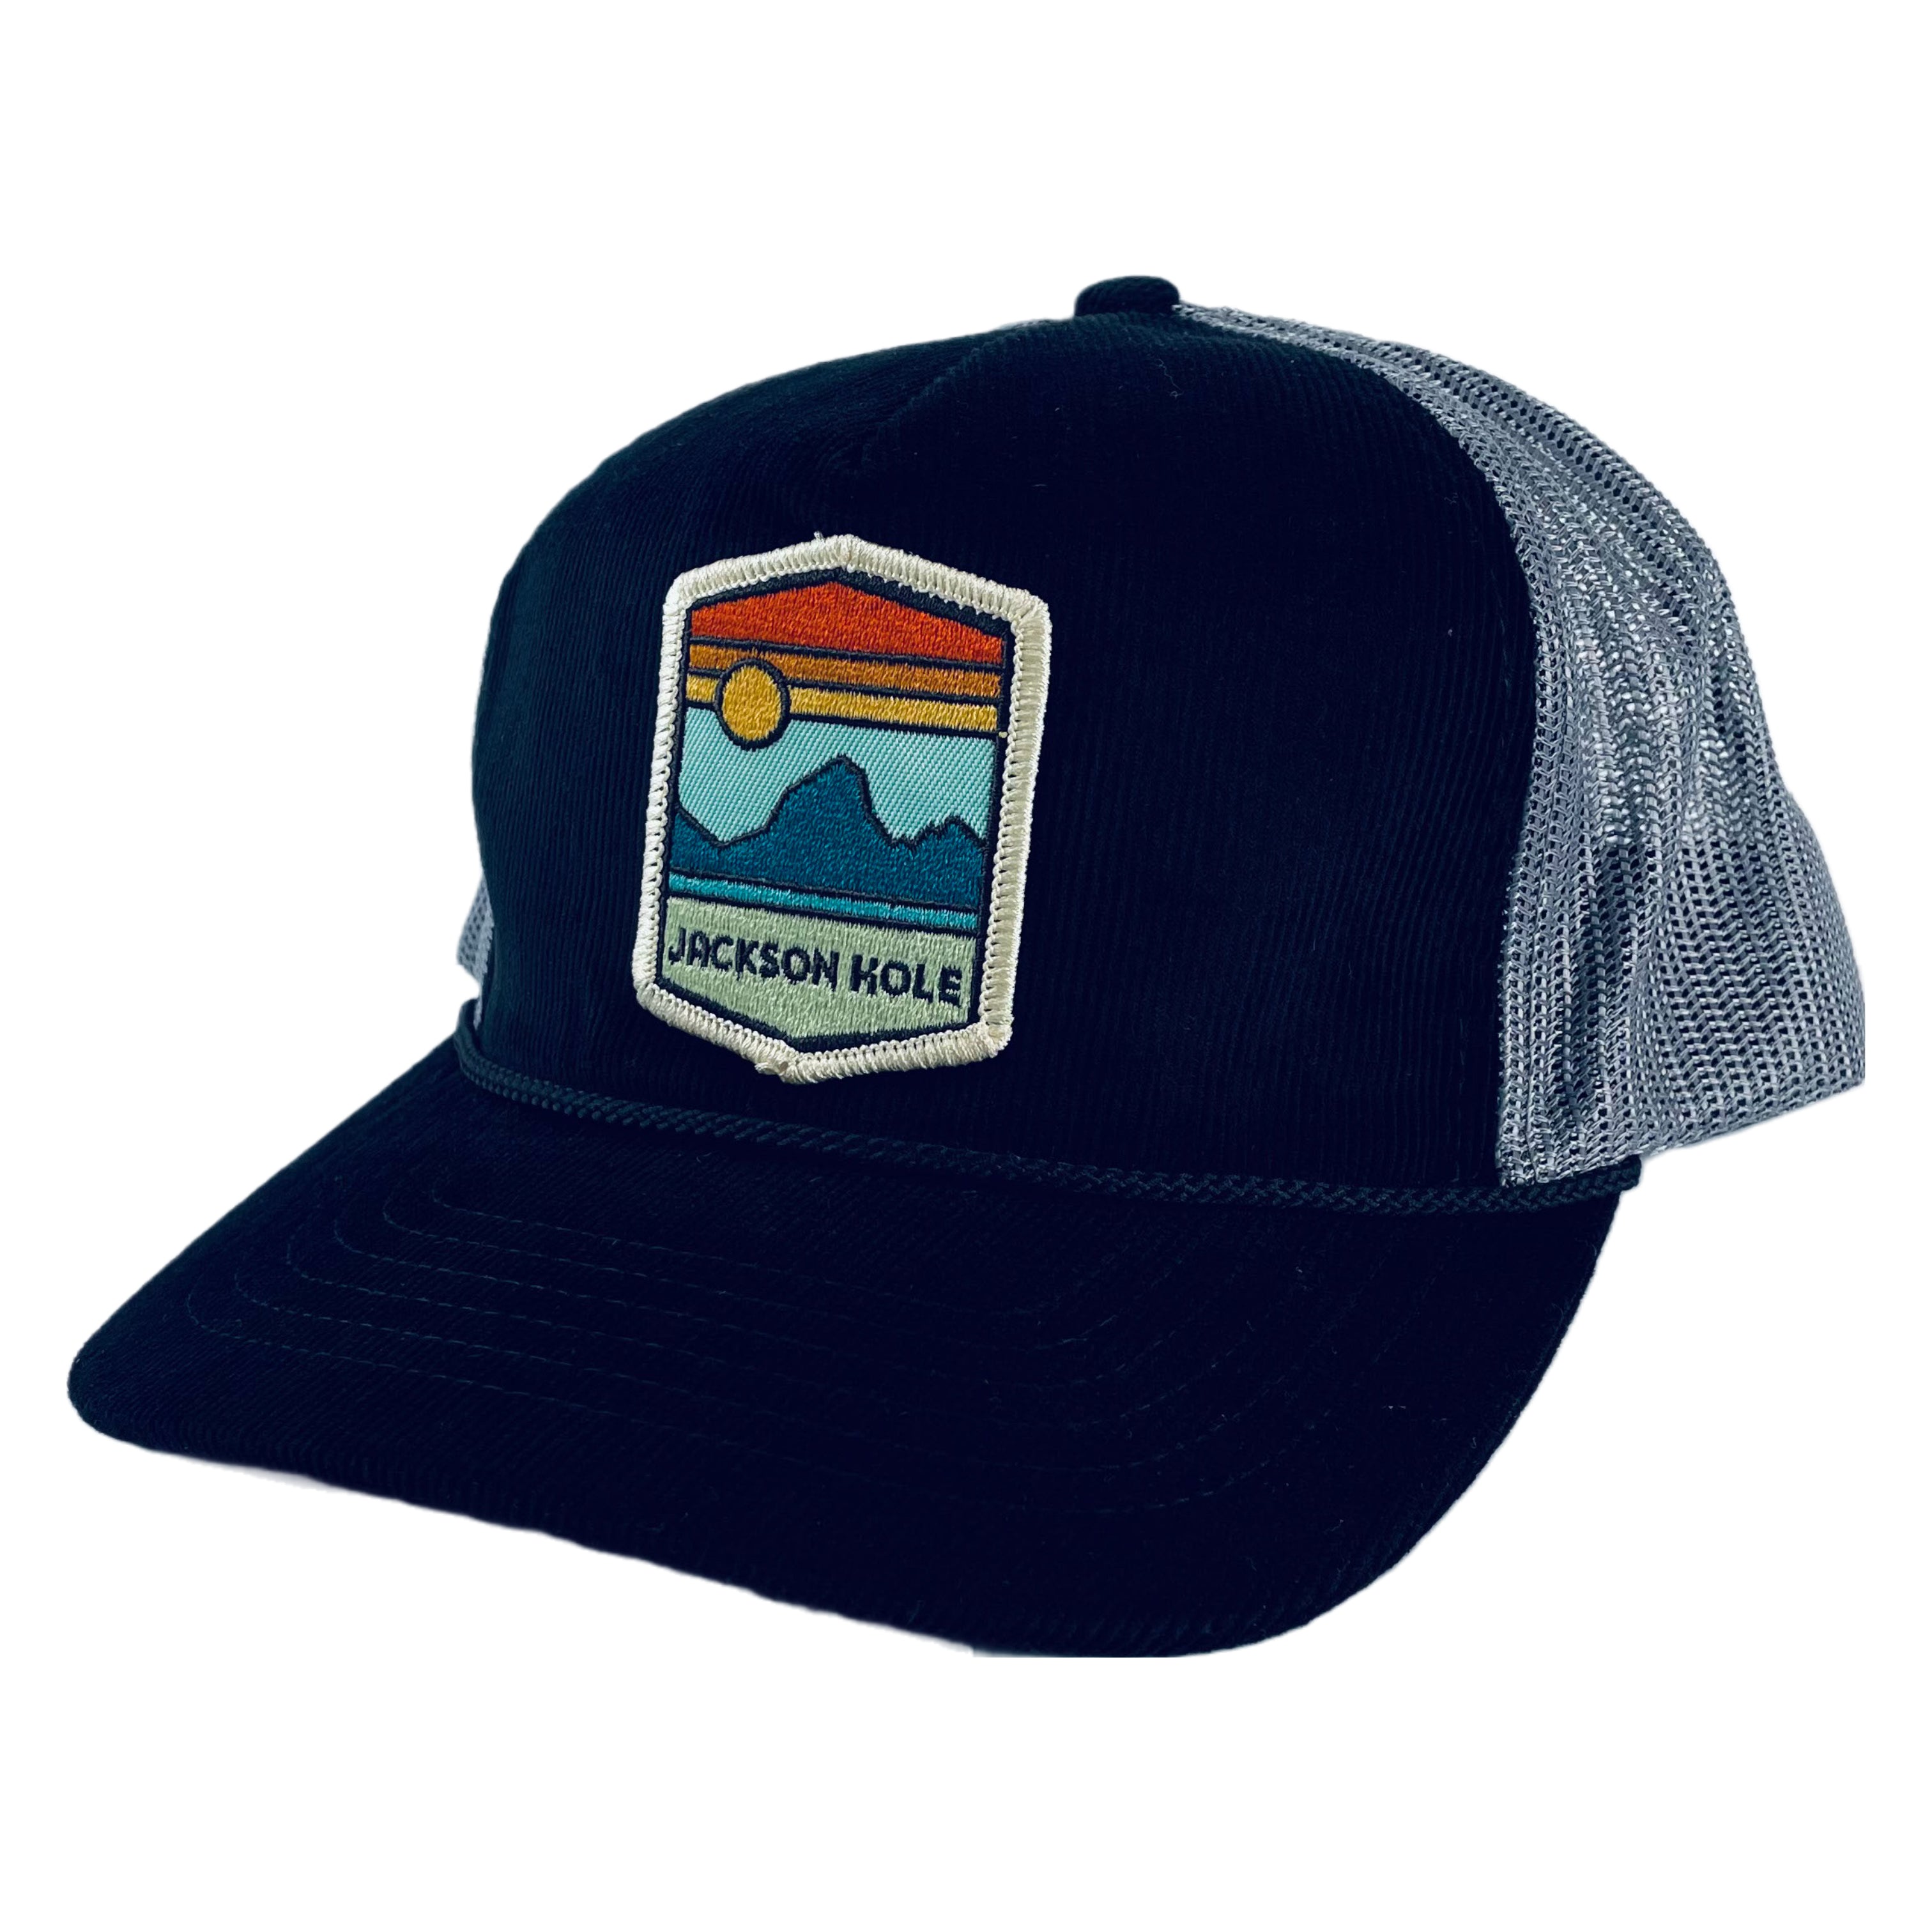 Black and Grey Mesh Back Hat Jackson Hole Sun and Mountain Patch